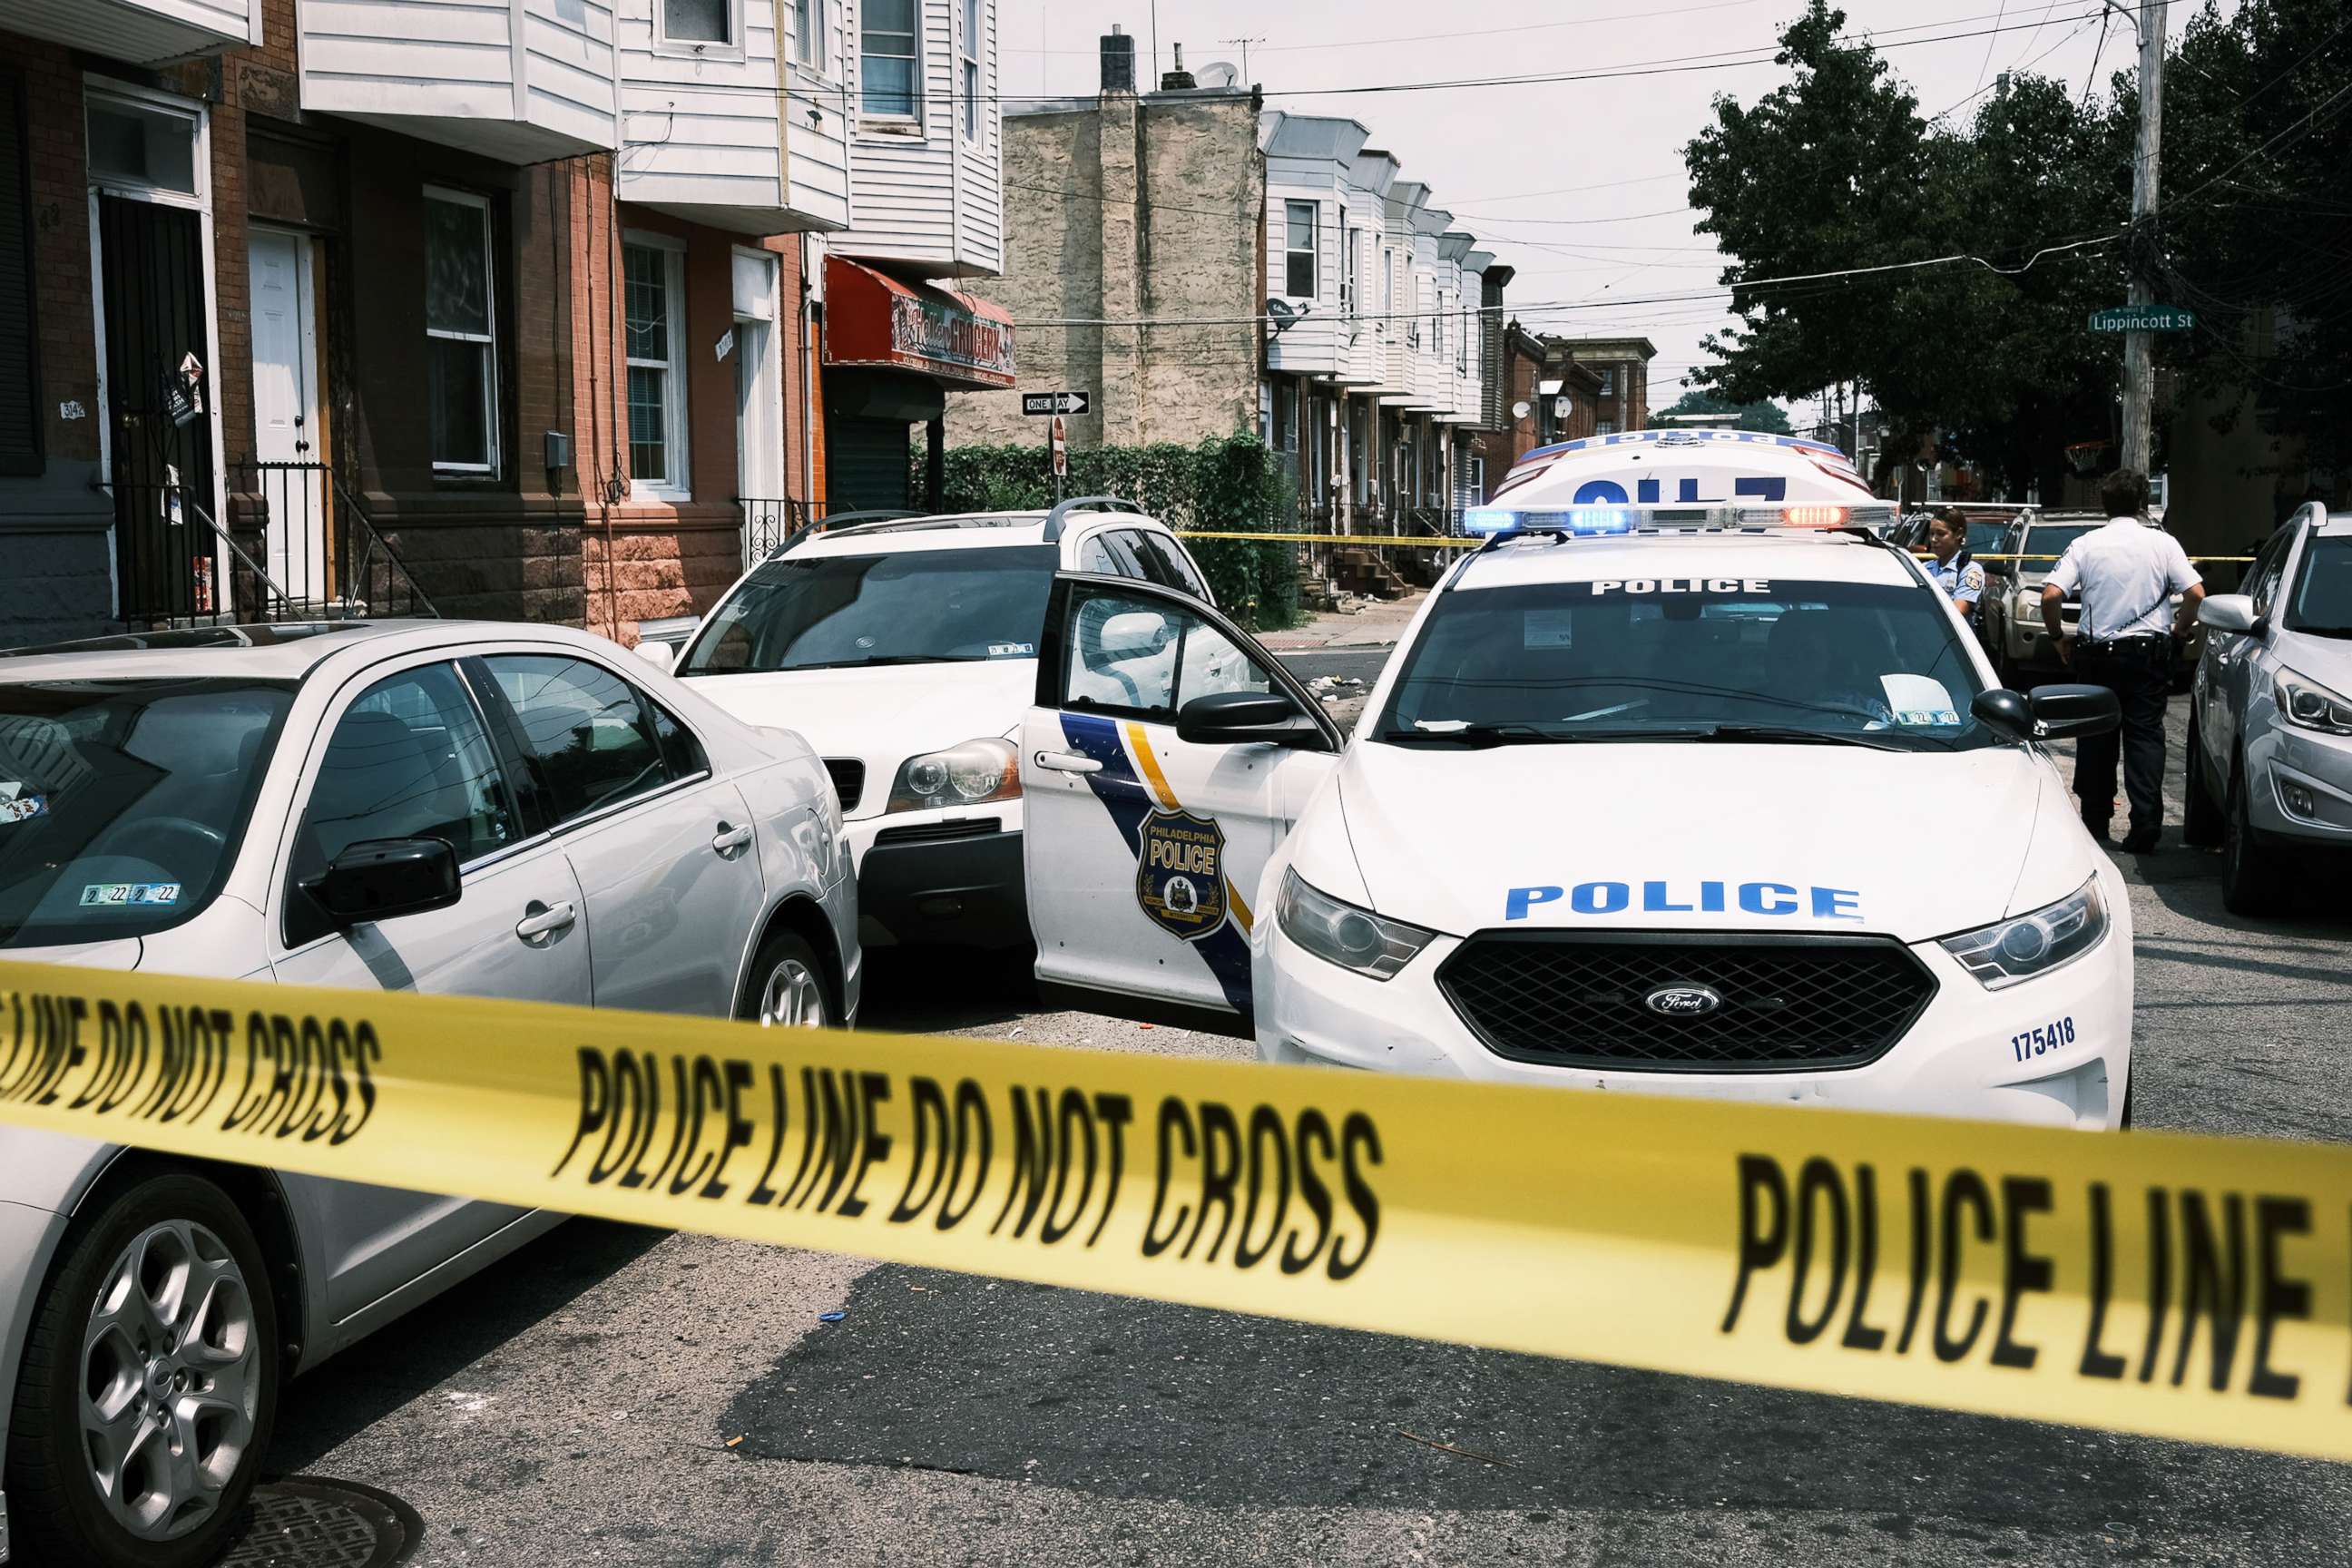 PHOTO: Police tape blocks a street where a person was recently shot in a drug related event in in Philadelphia,  July 19, 2021.